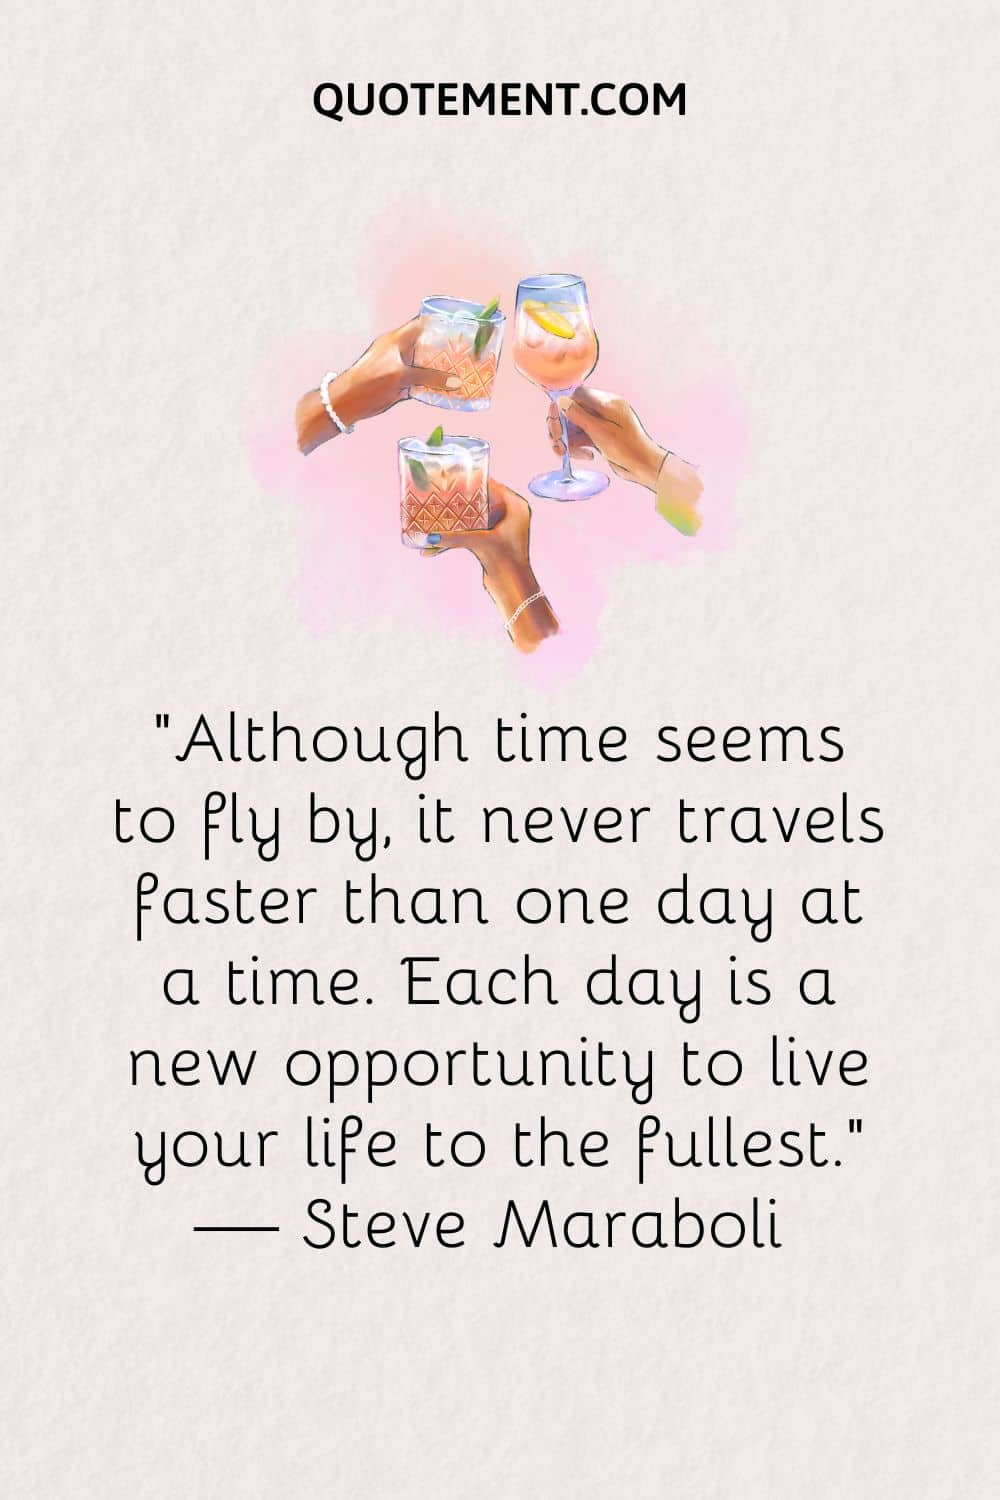 “Although time seems to fly by, it never travels faster than one day at a time. Each day is a new opportunity to live your life to the fullest.” — Steve Maraboli